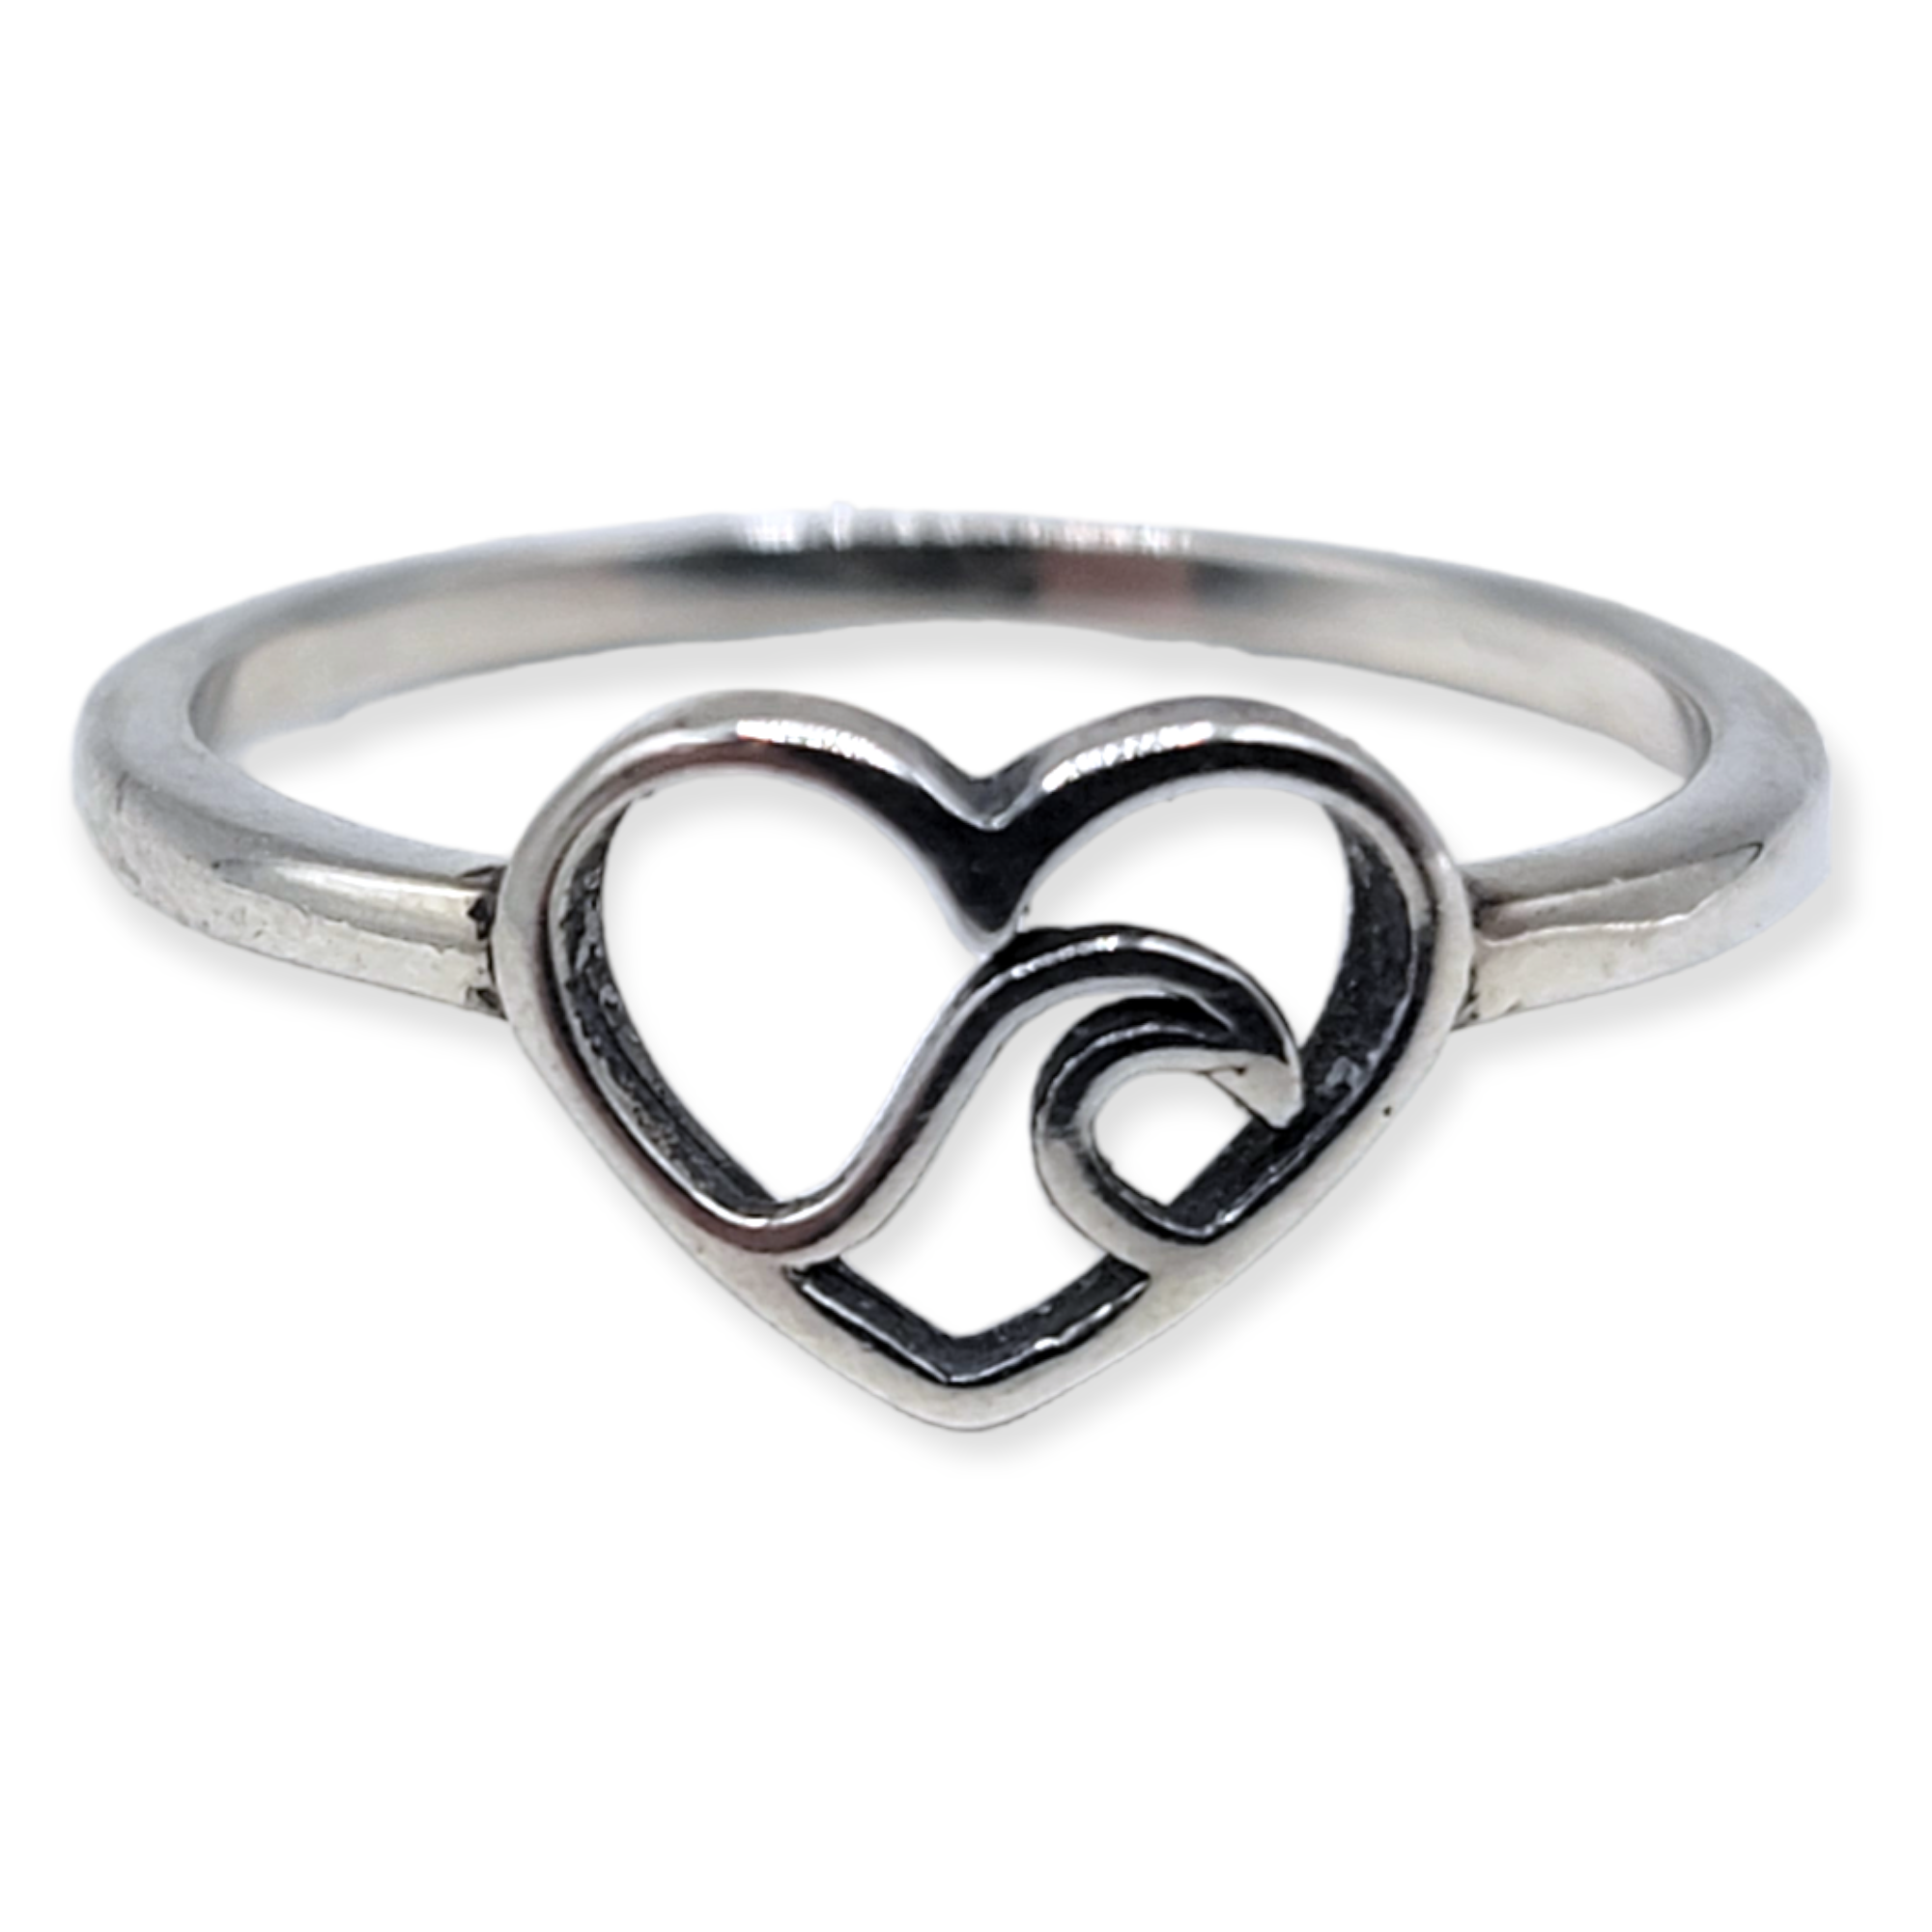 Waves/heart .925 Sterling Silver Ring - Travelers Trade Post